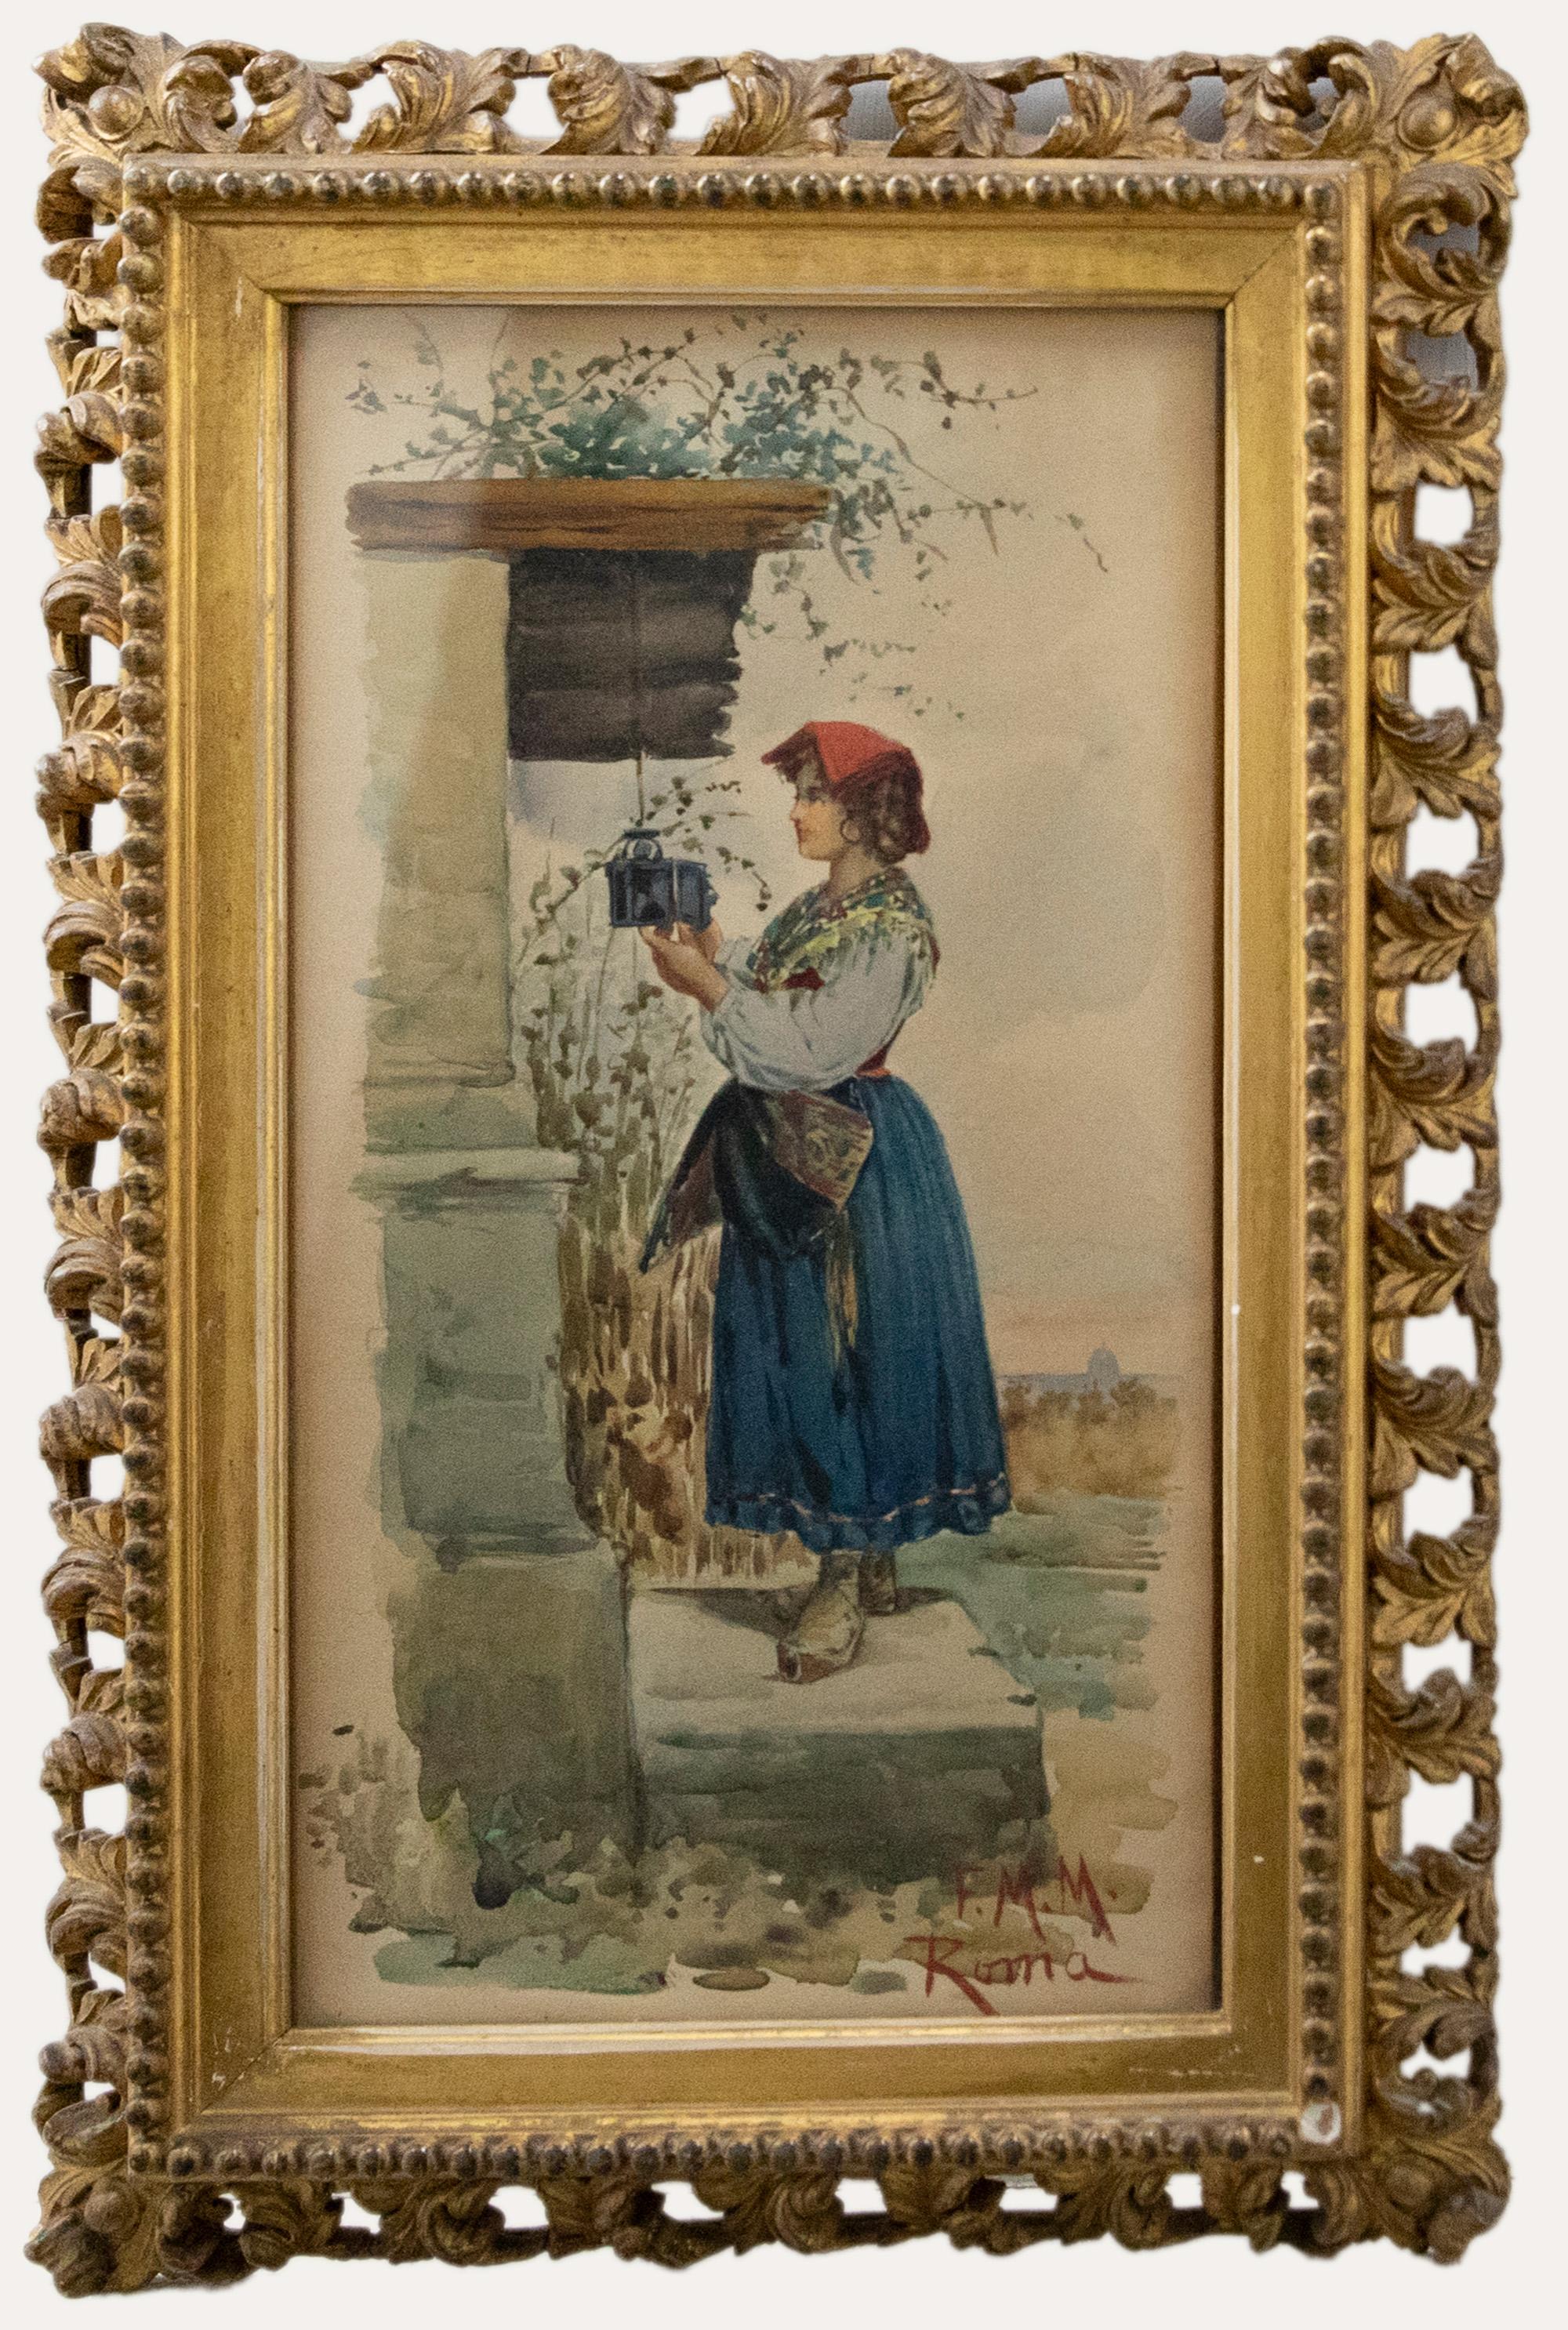 A charming study of an Italian woman replacing the oil lamp outside of her home. She wears traditional, brightly coloured clothing with a red headpiece. Signed with initials and inscribed 'Roma' to the lower right. Well presented in a pierced gilt